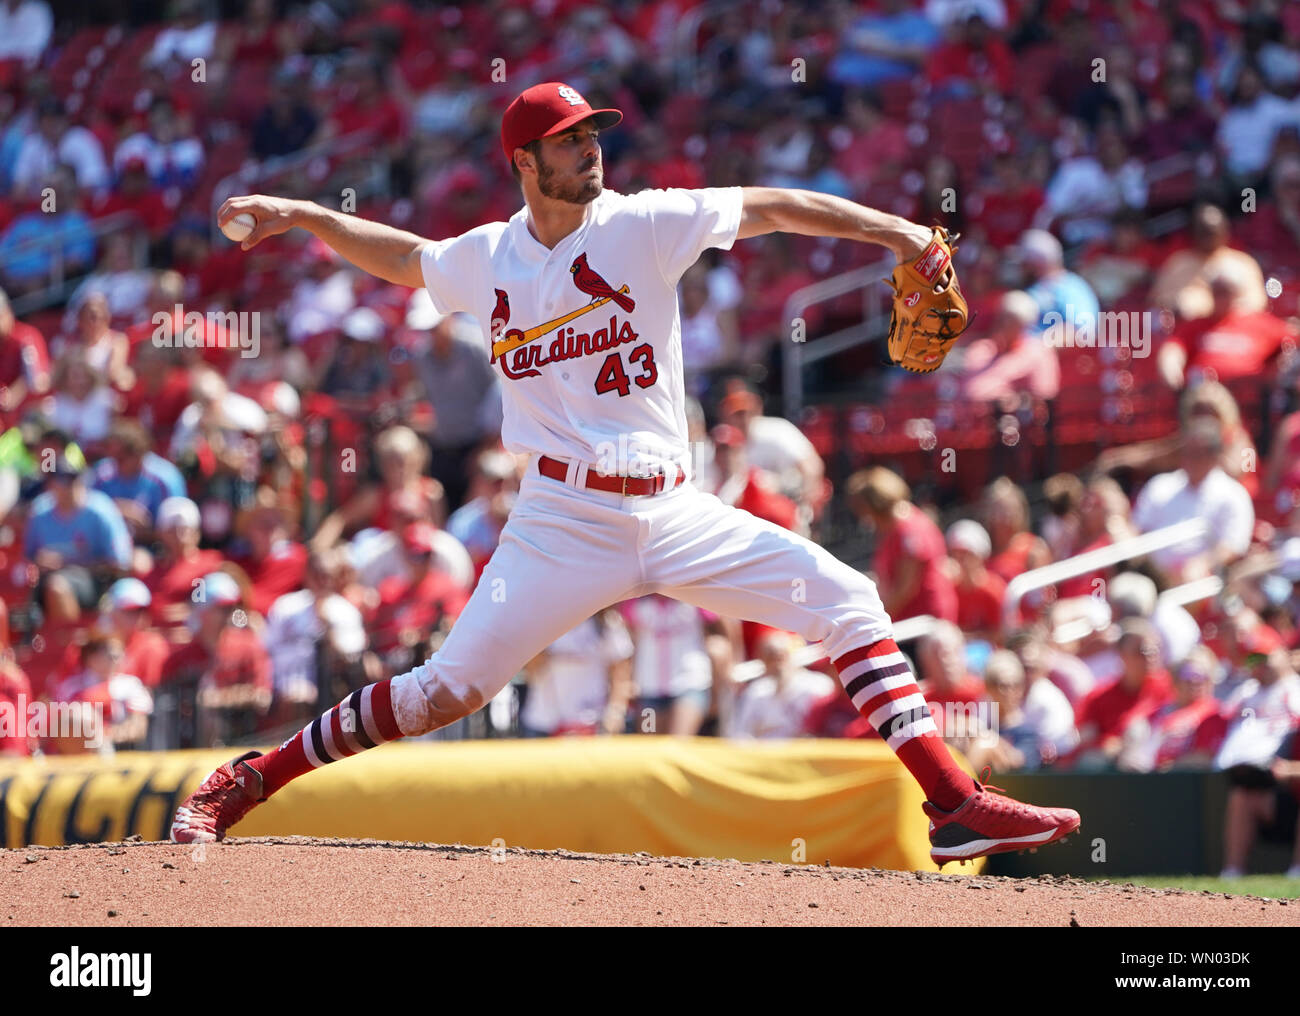 St. Louis, United States. 05th Sep, 2019. St. Louis Cardinals starting pitcher Dekota Hudson delivers a pitch to the San Francisco Giants in the fifth inning at Busch Stadium in St. Louis on Thursday, September 5, 2019. St. Louis defeated San Francisco, 10-0. Photo by Bill Greenblatt/UPI Credit: UPI/Alamy Live News Stock Photo